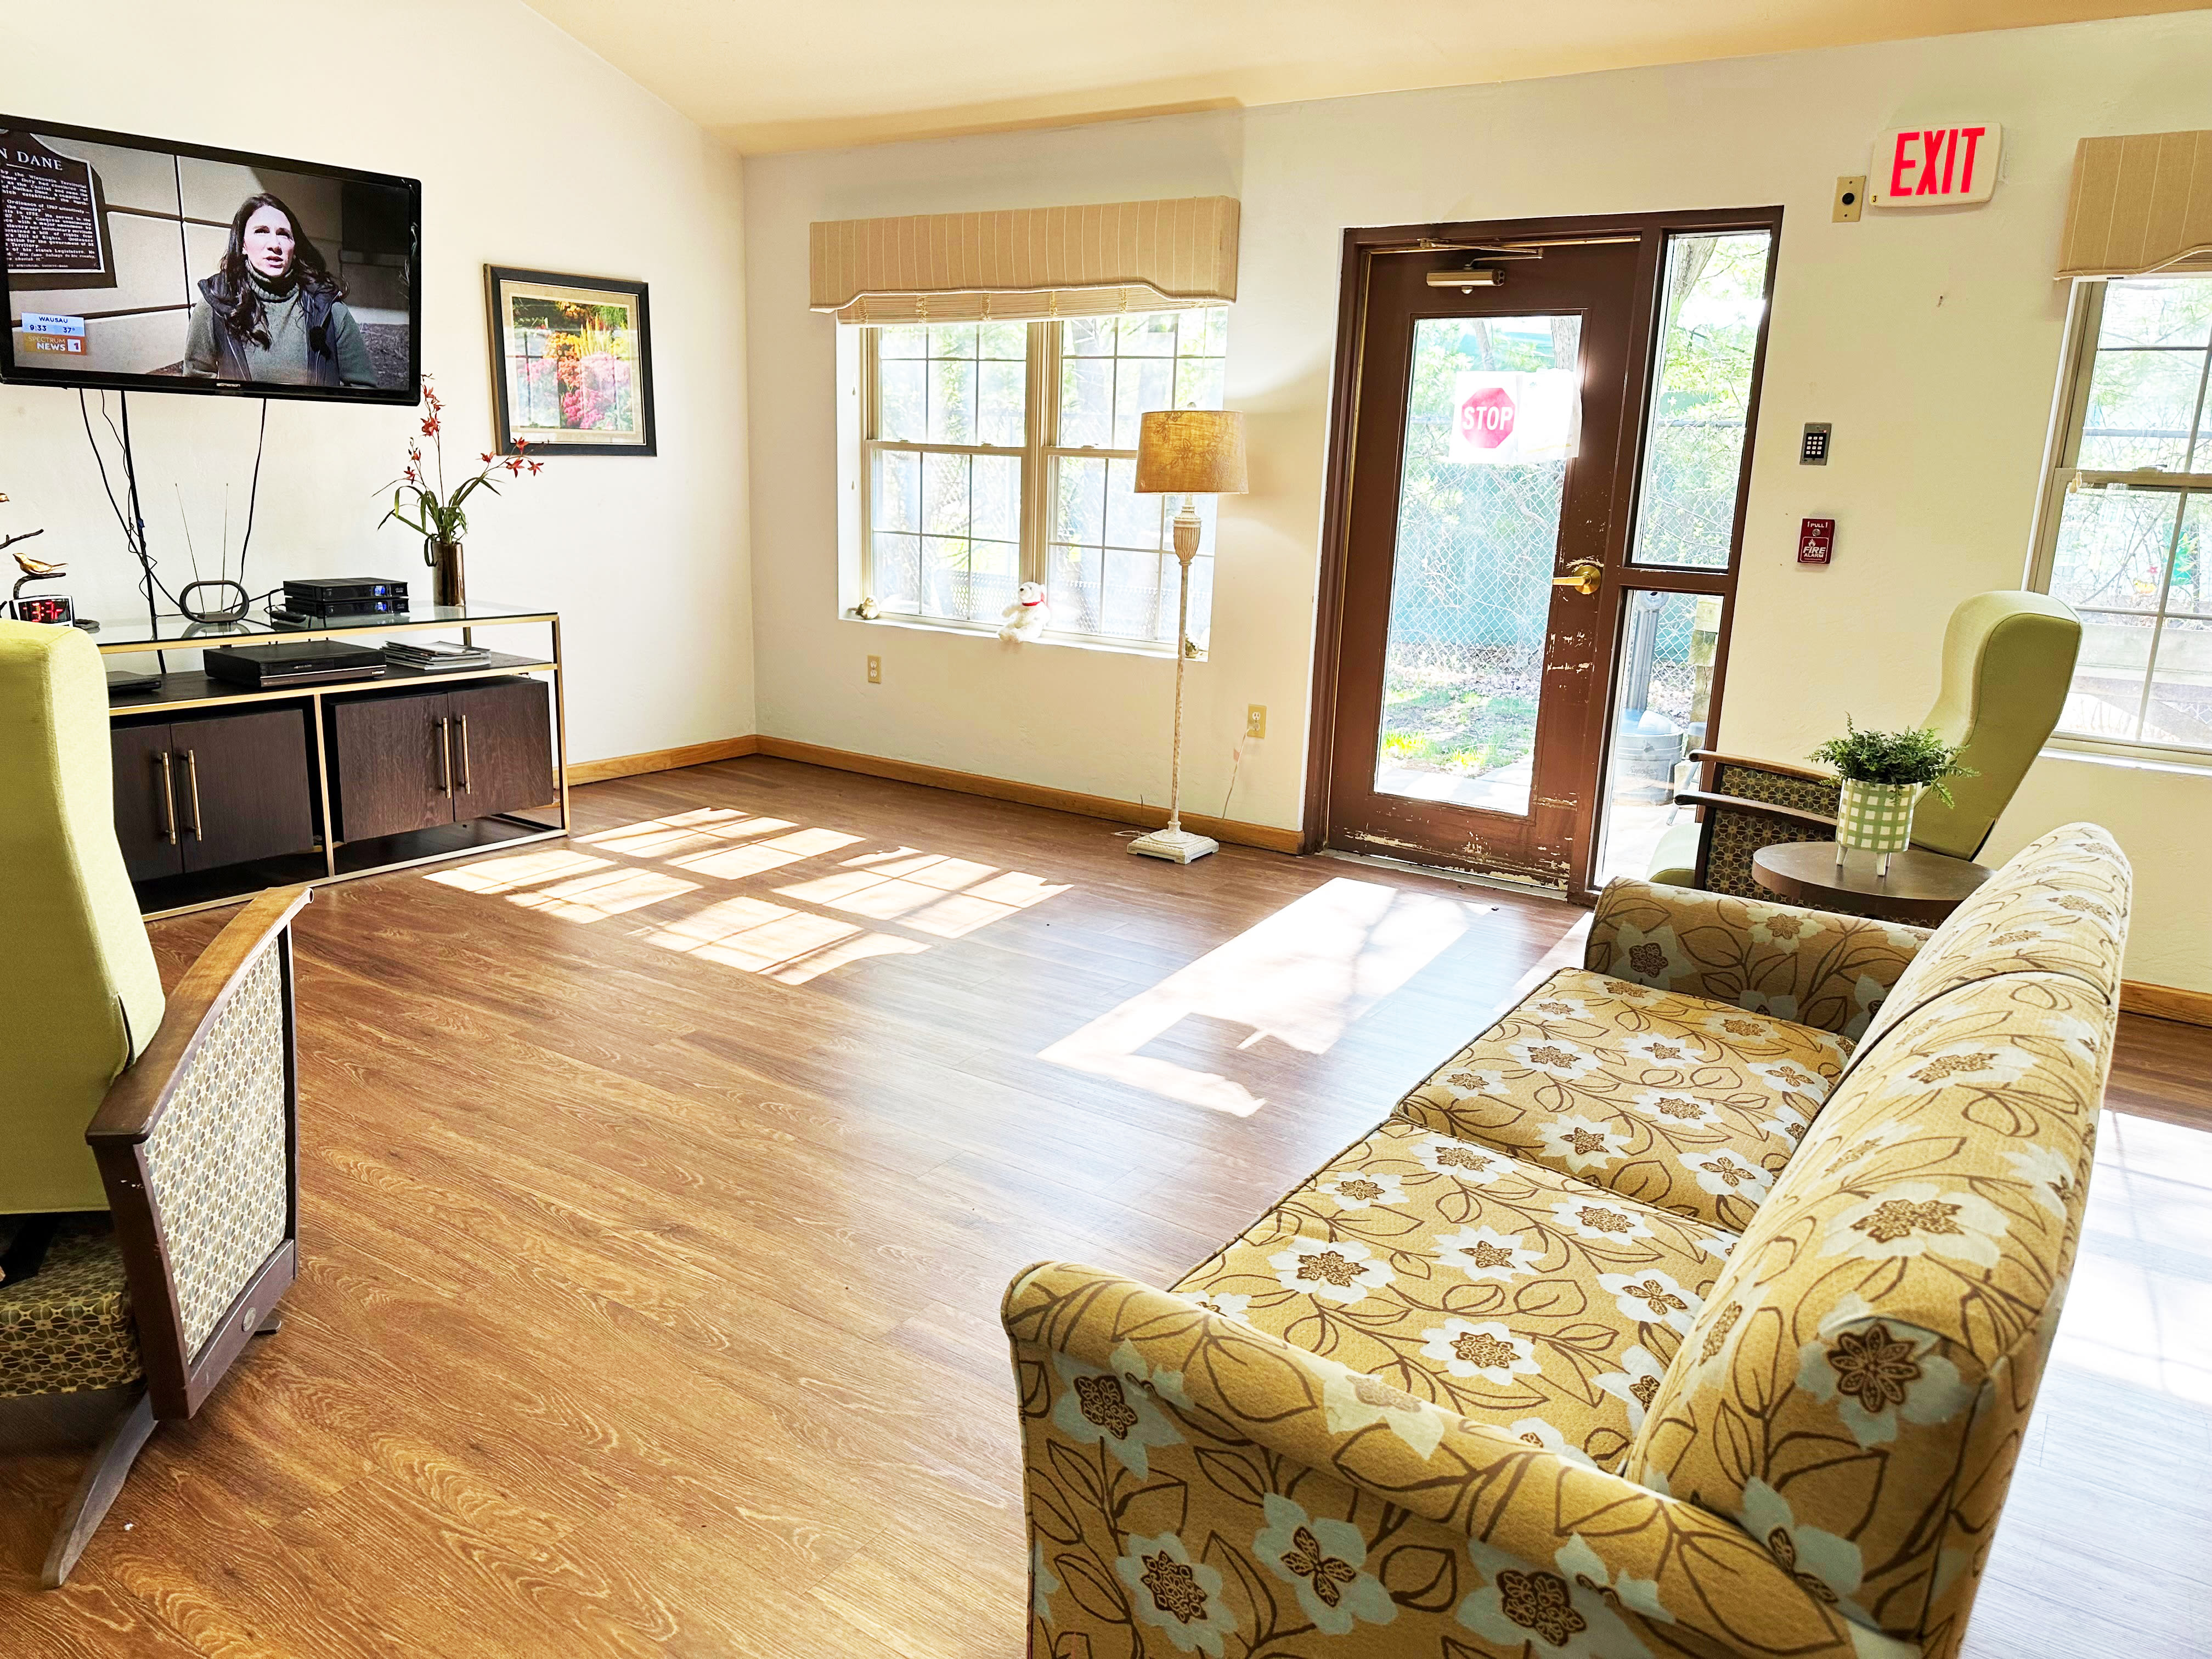 Living room at Wyndemere Memory Care in Green Bay, Wisconsin. 